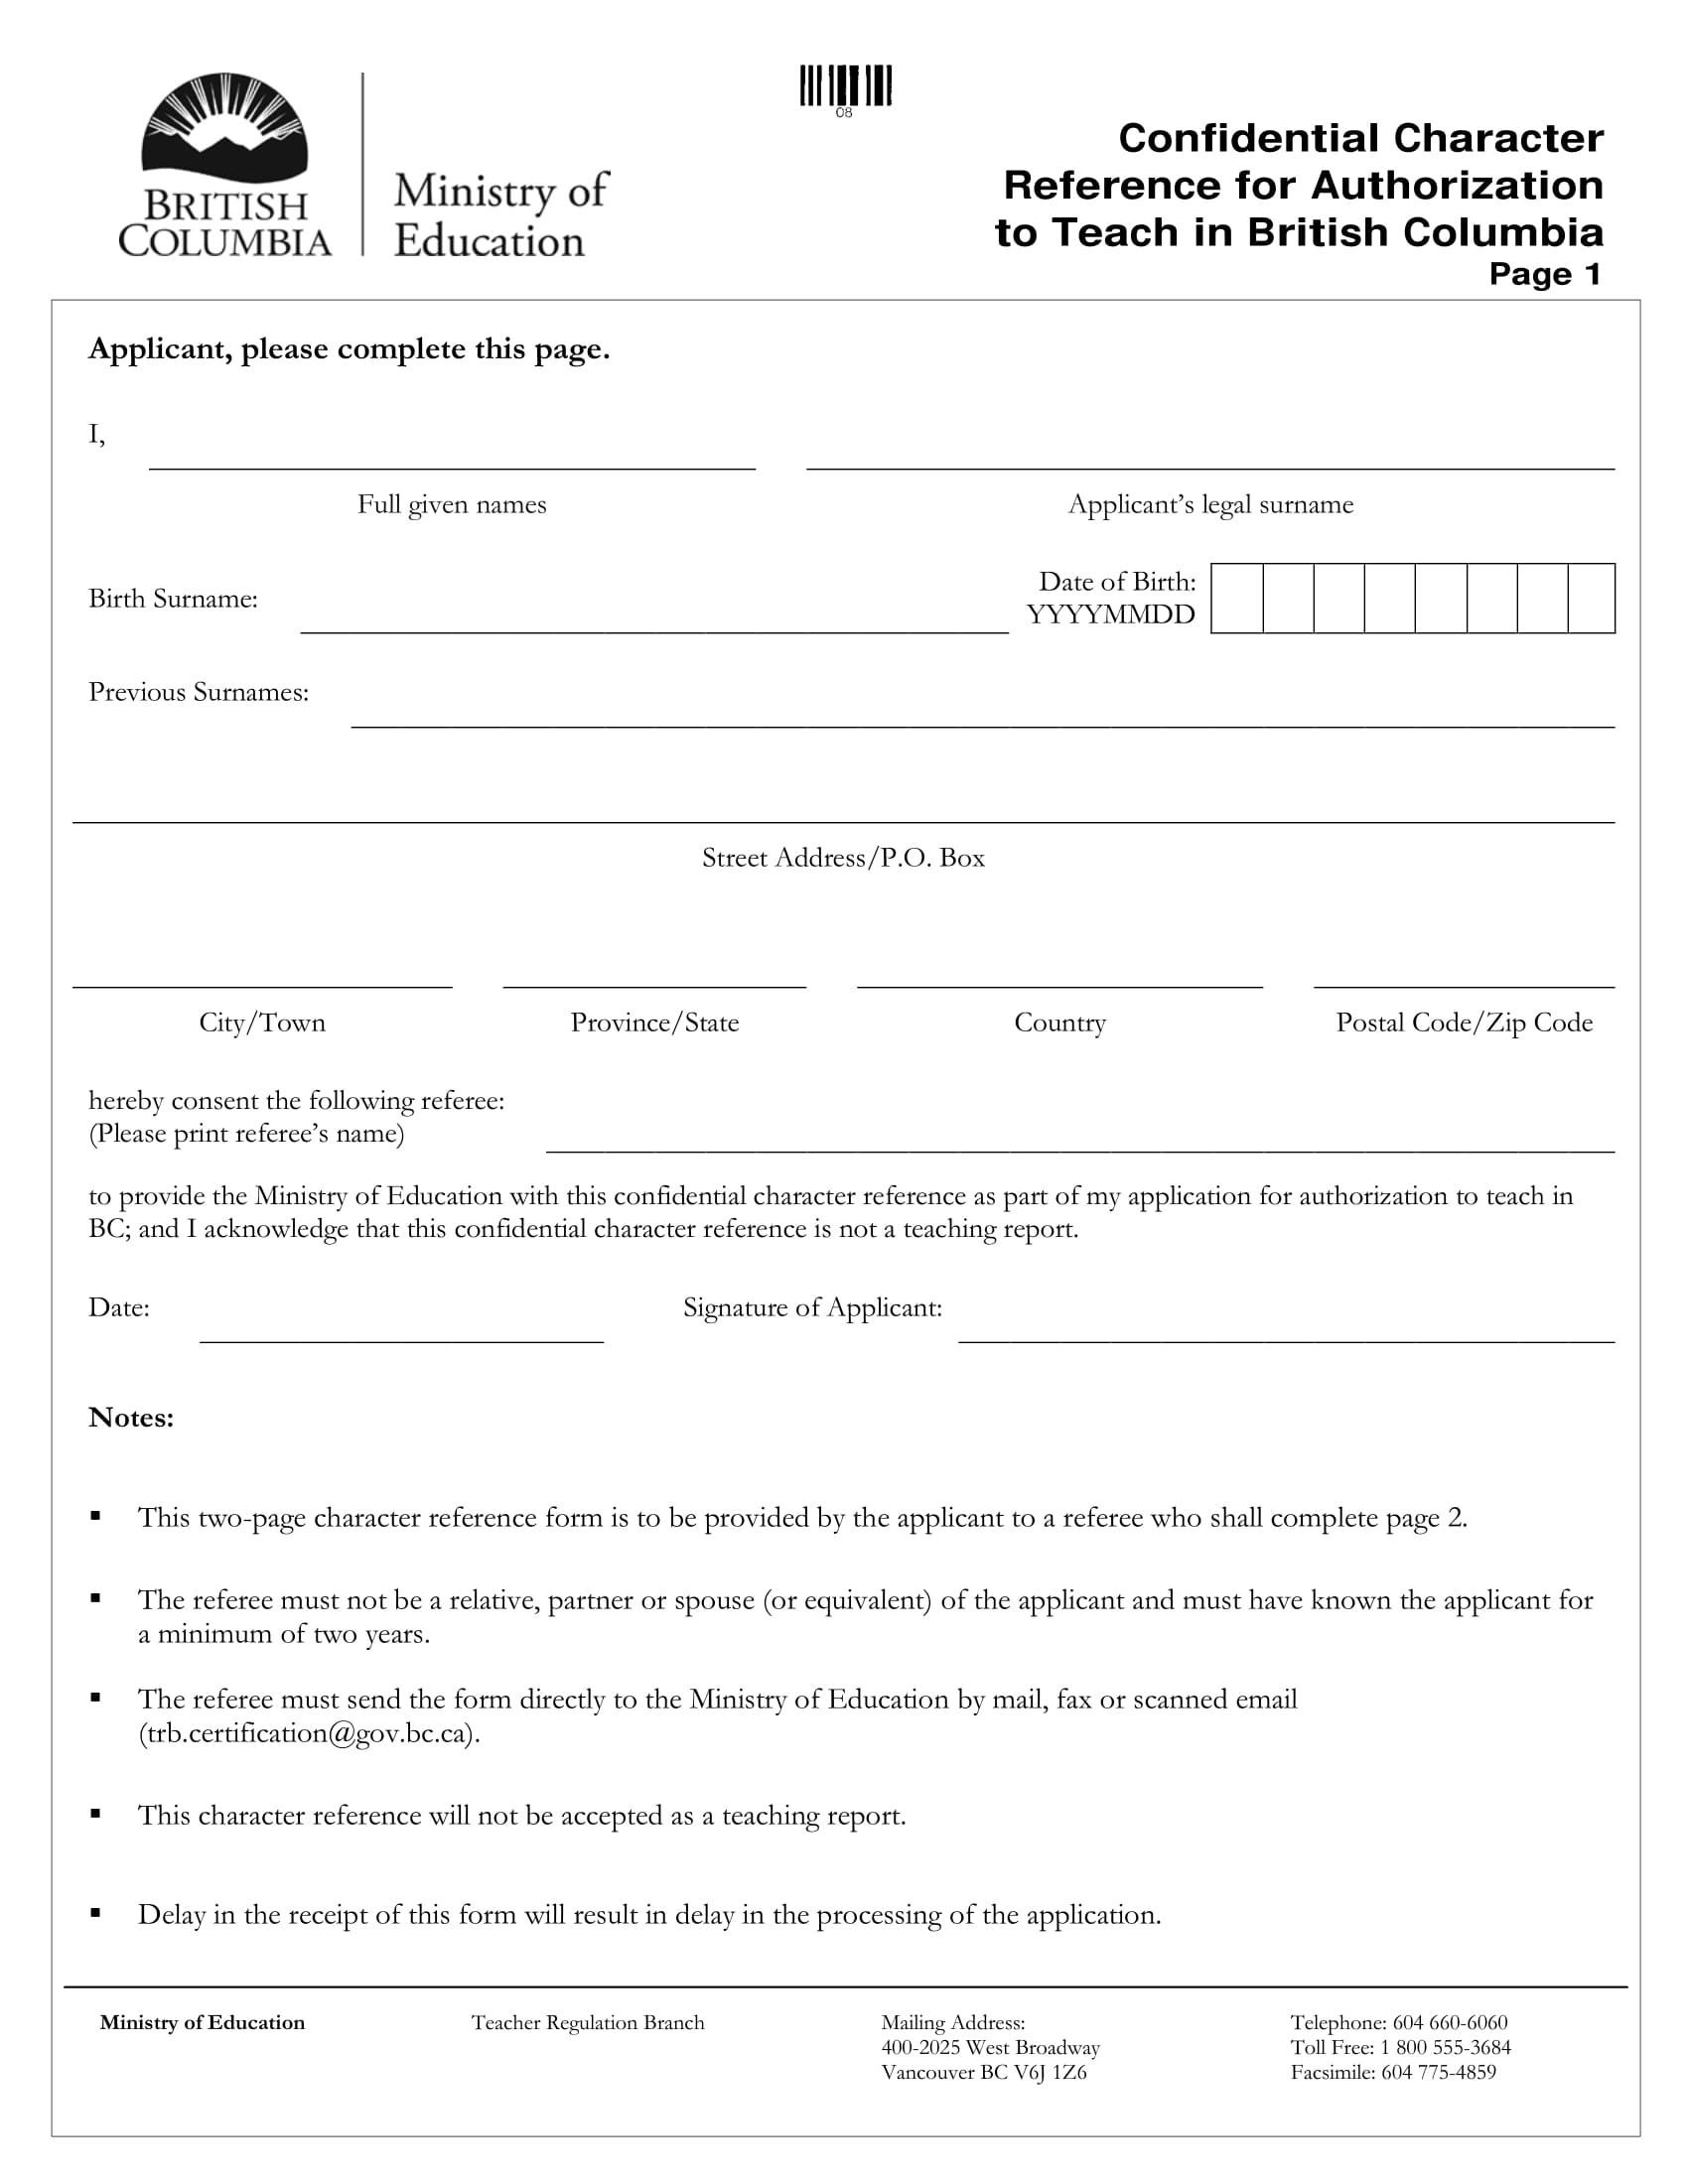 confidential character reference form and letter example 1